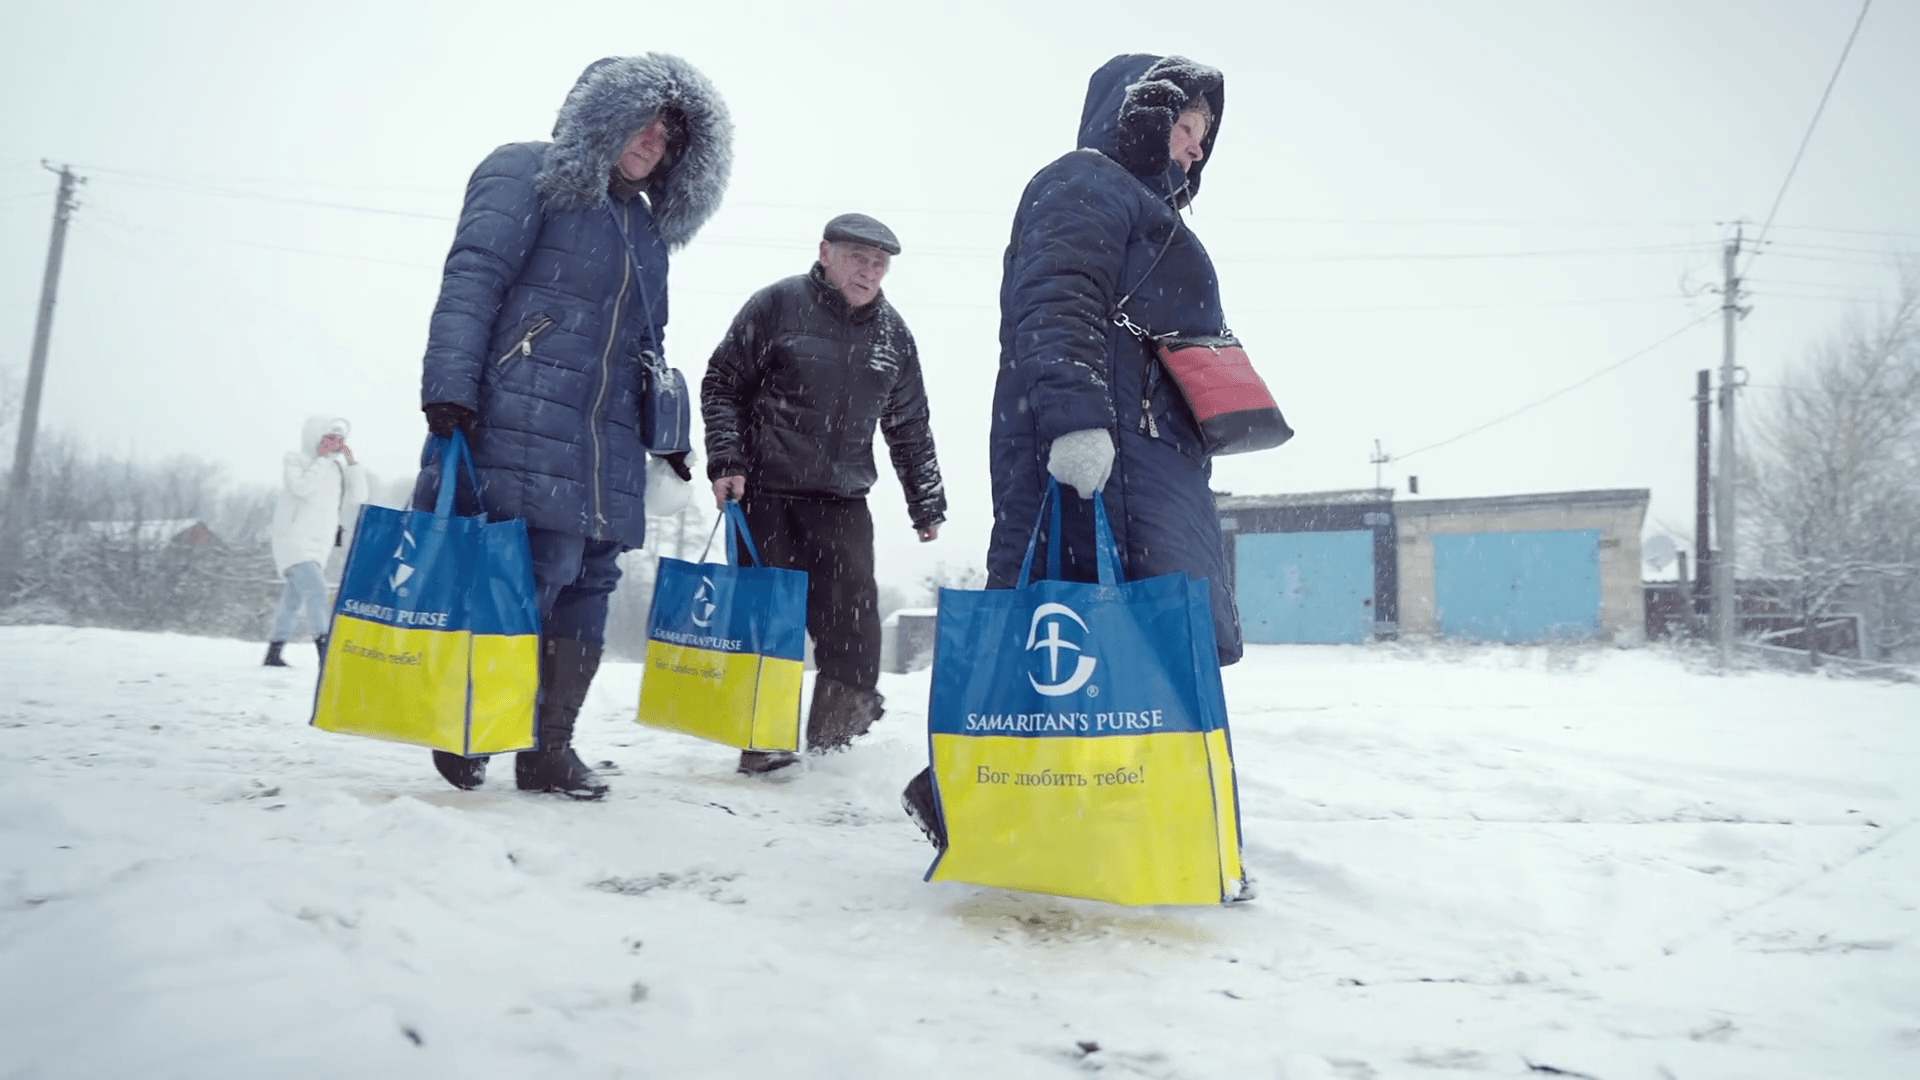 Samaritan’s Purse is helping to provide food for Kseniya, a Ukrainian mother, and other families in the war-torn country.